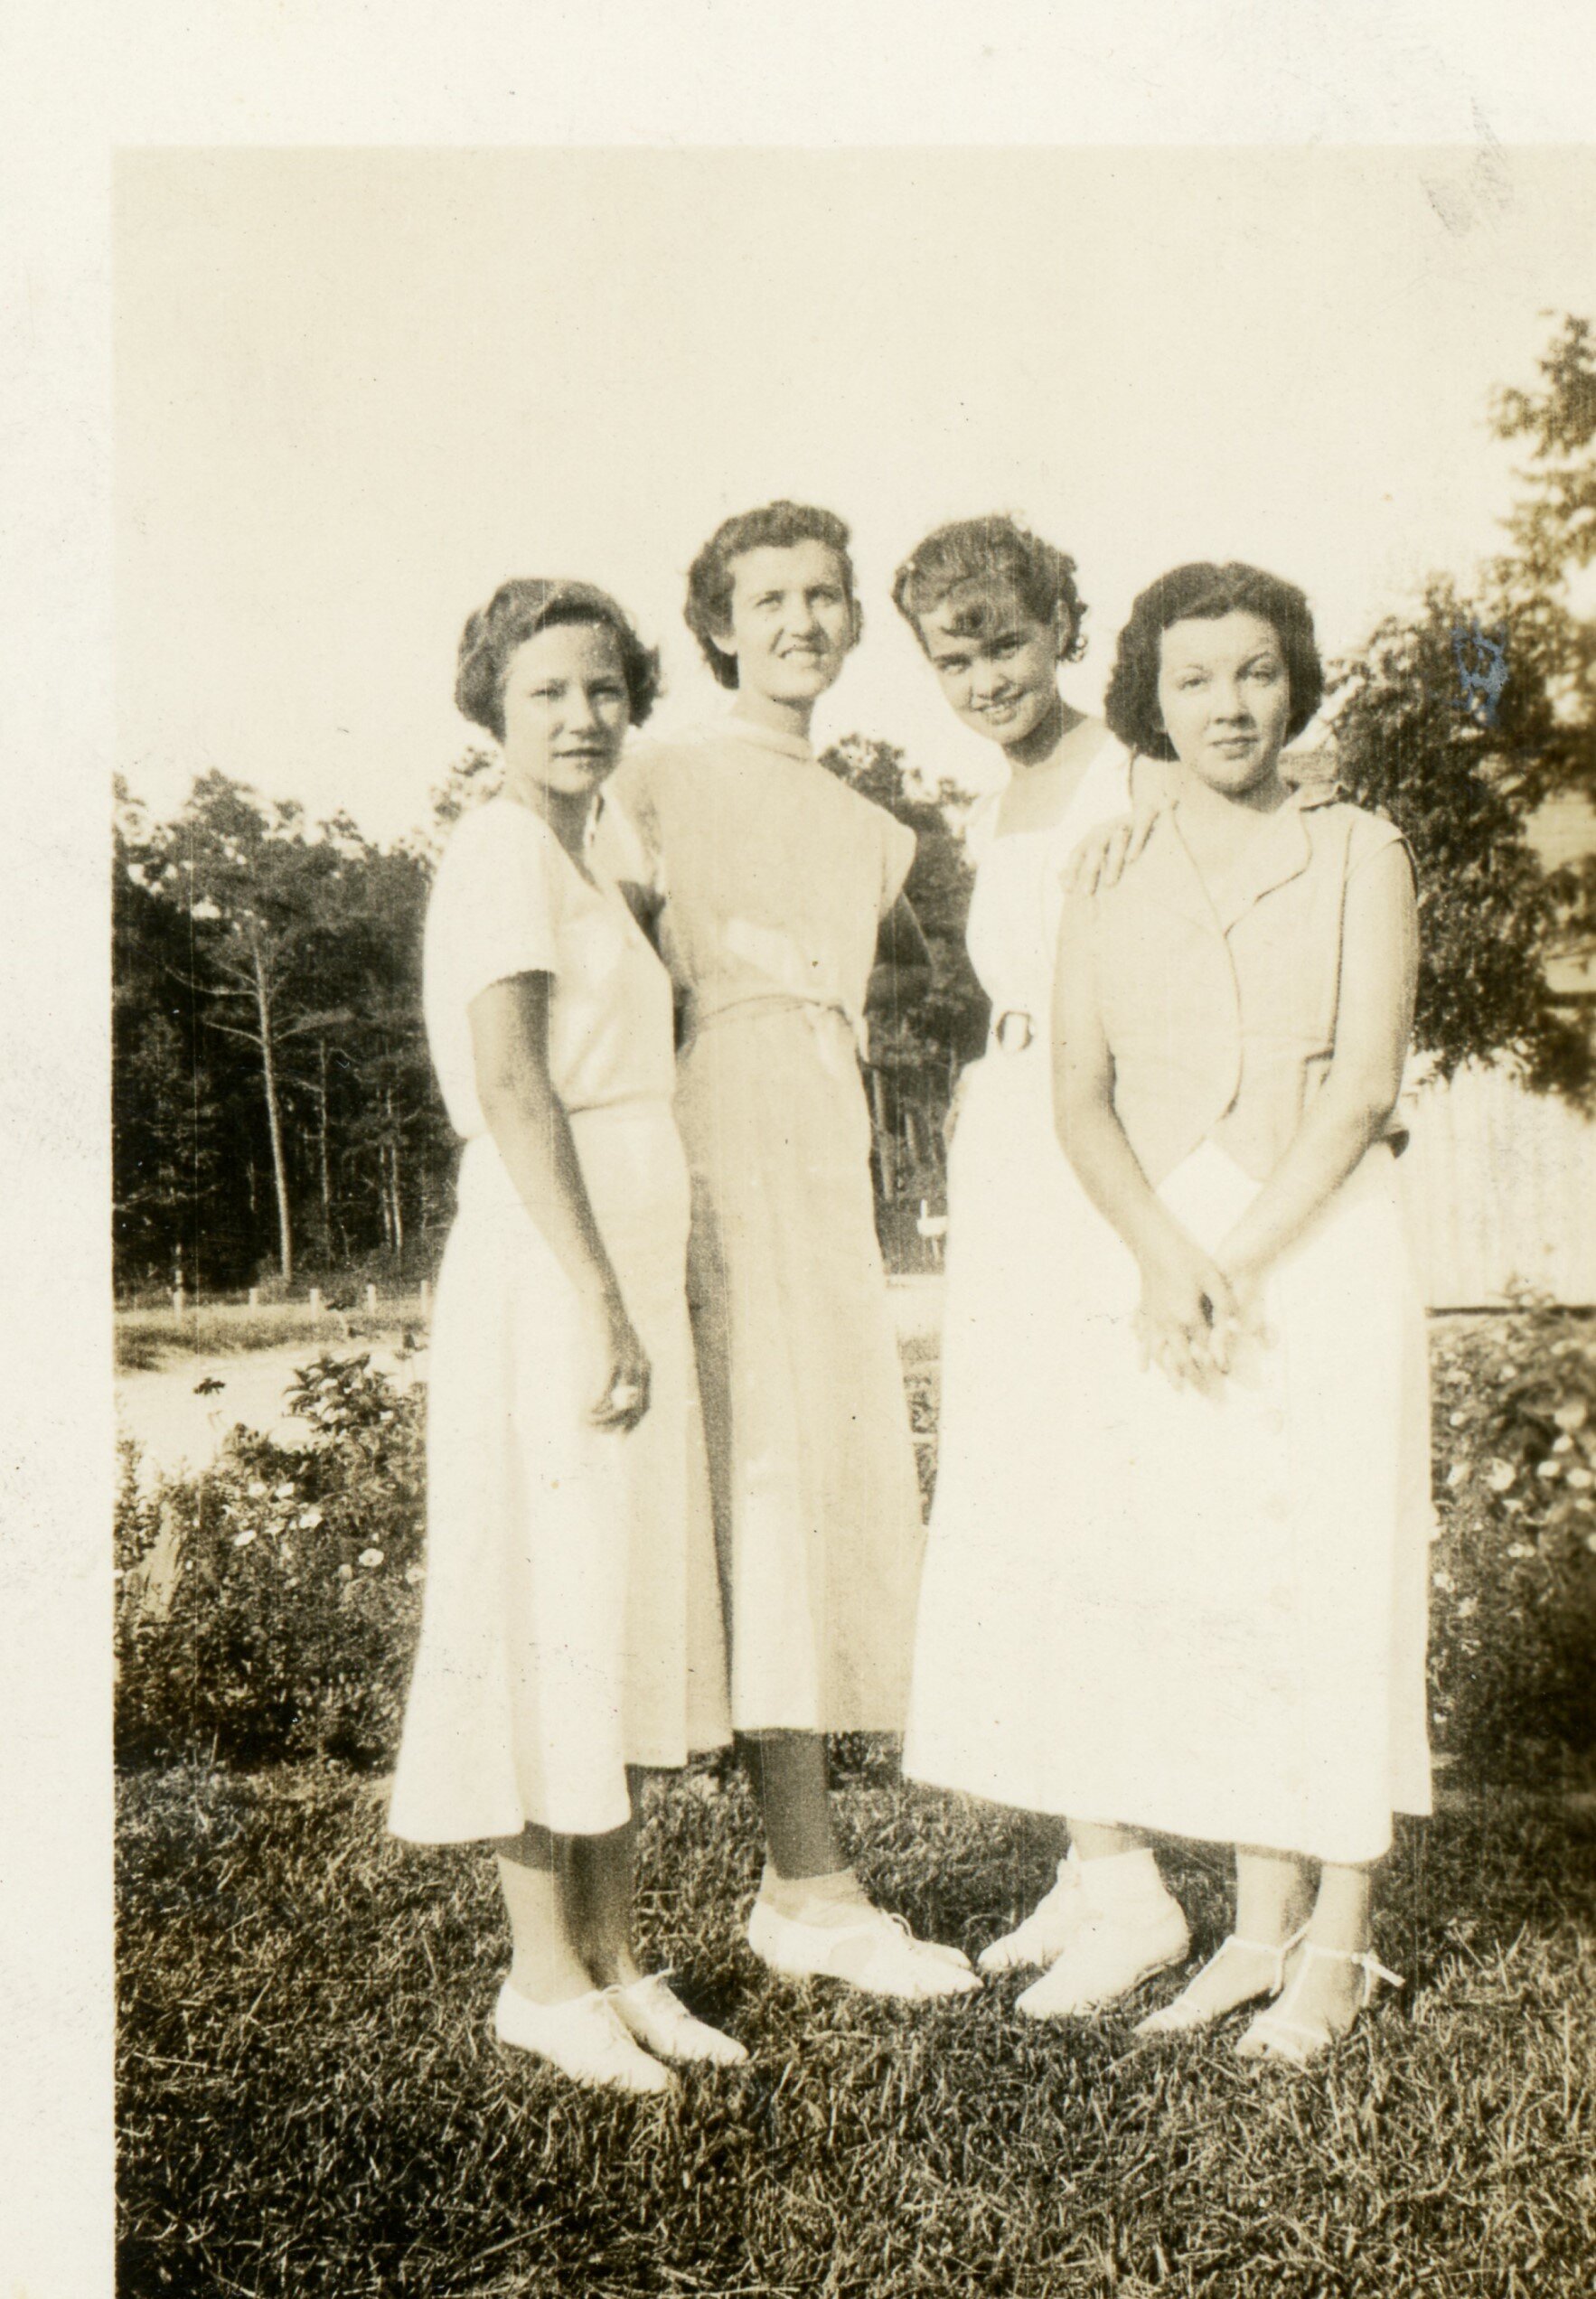 Annie Laurie Brandenburg, Belle Taylor (Daughter of Alma Pigott Taylor), Dorothy Lewis Chadwick, and “Hunky” Renata Chadwick